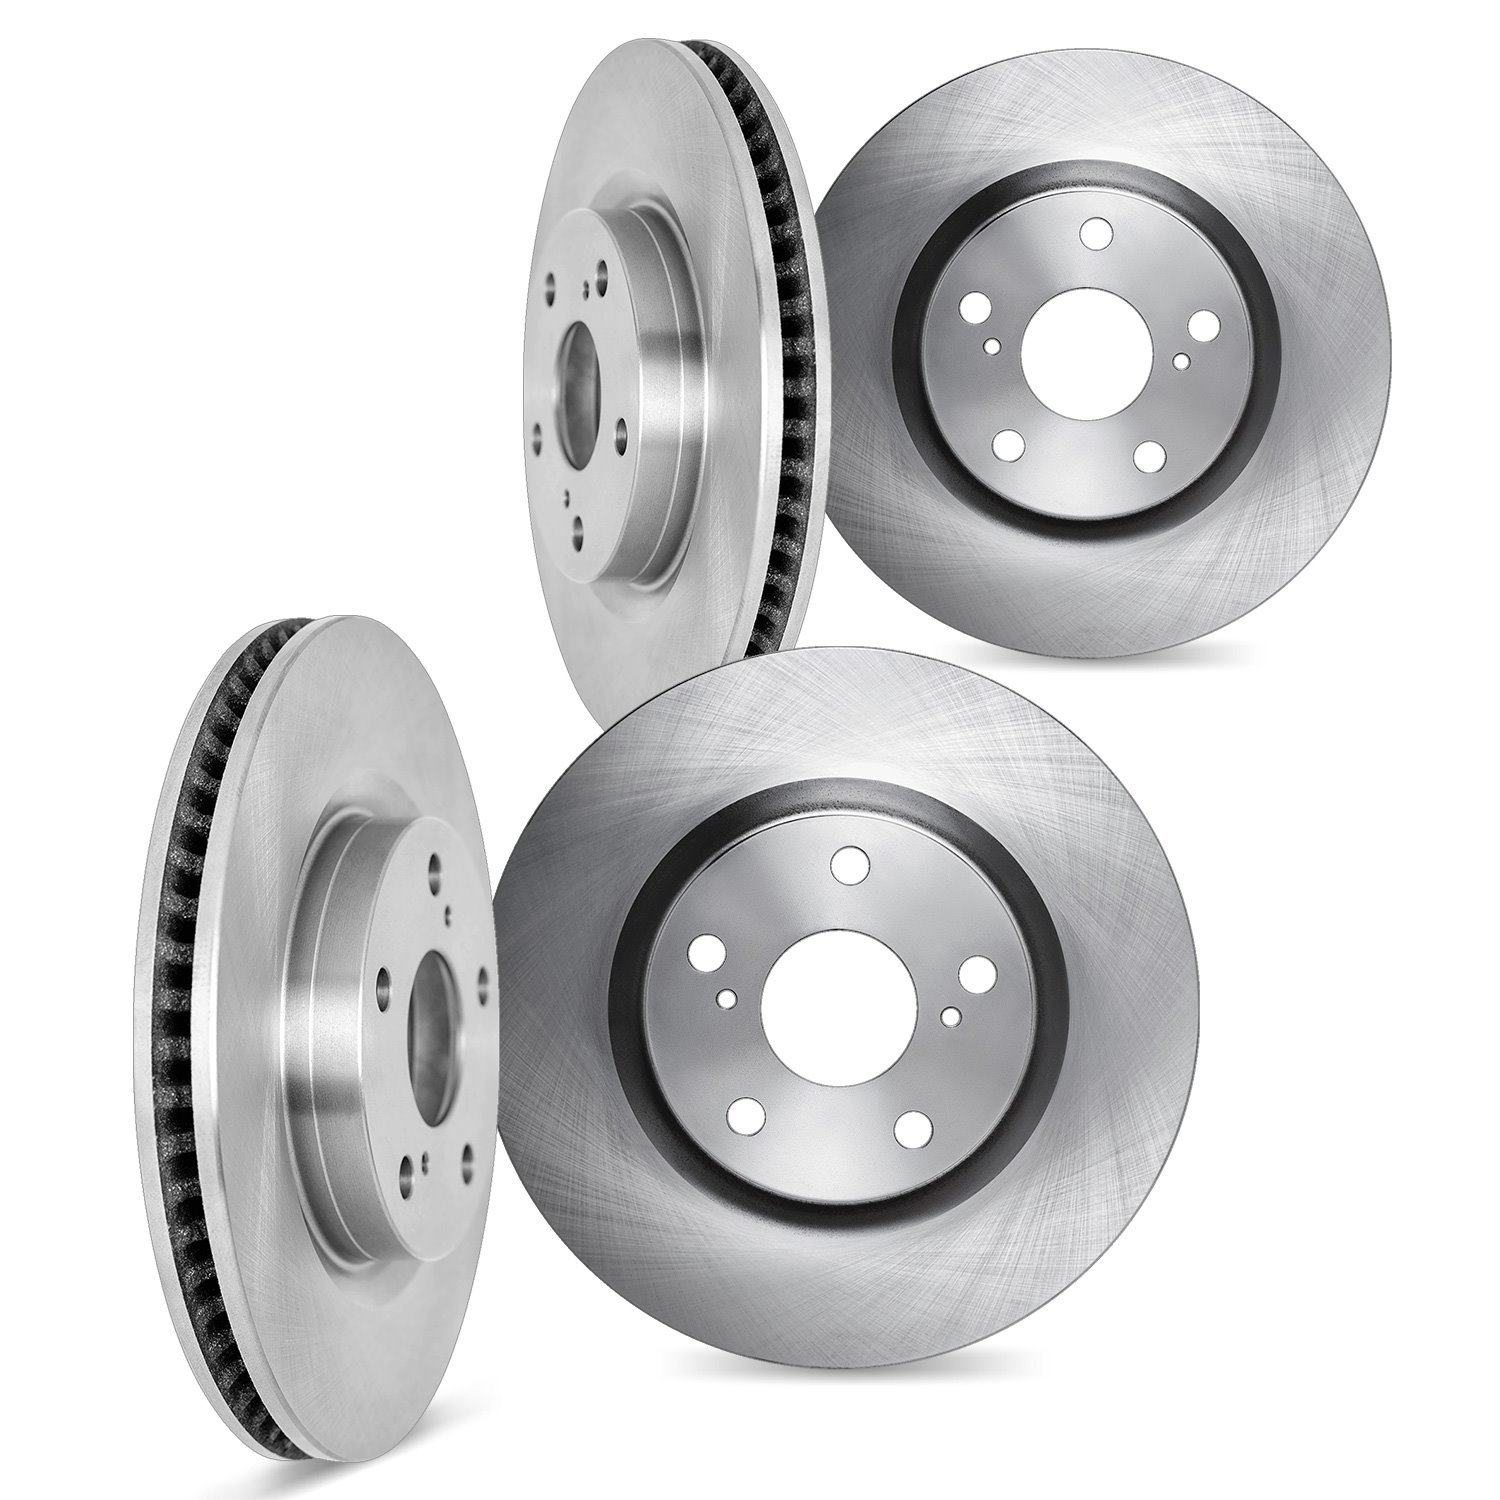 6004-73062 Brake Rotors, Fits Select Audi/Volkswagen, Position: Front and Rear